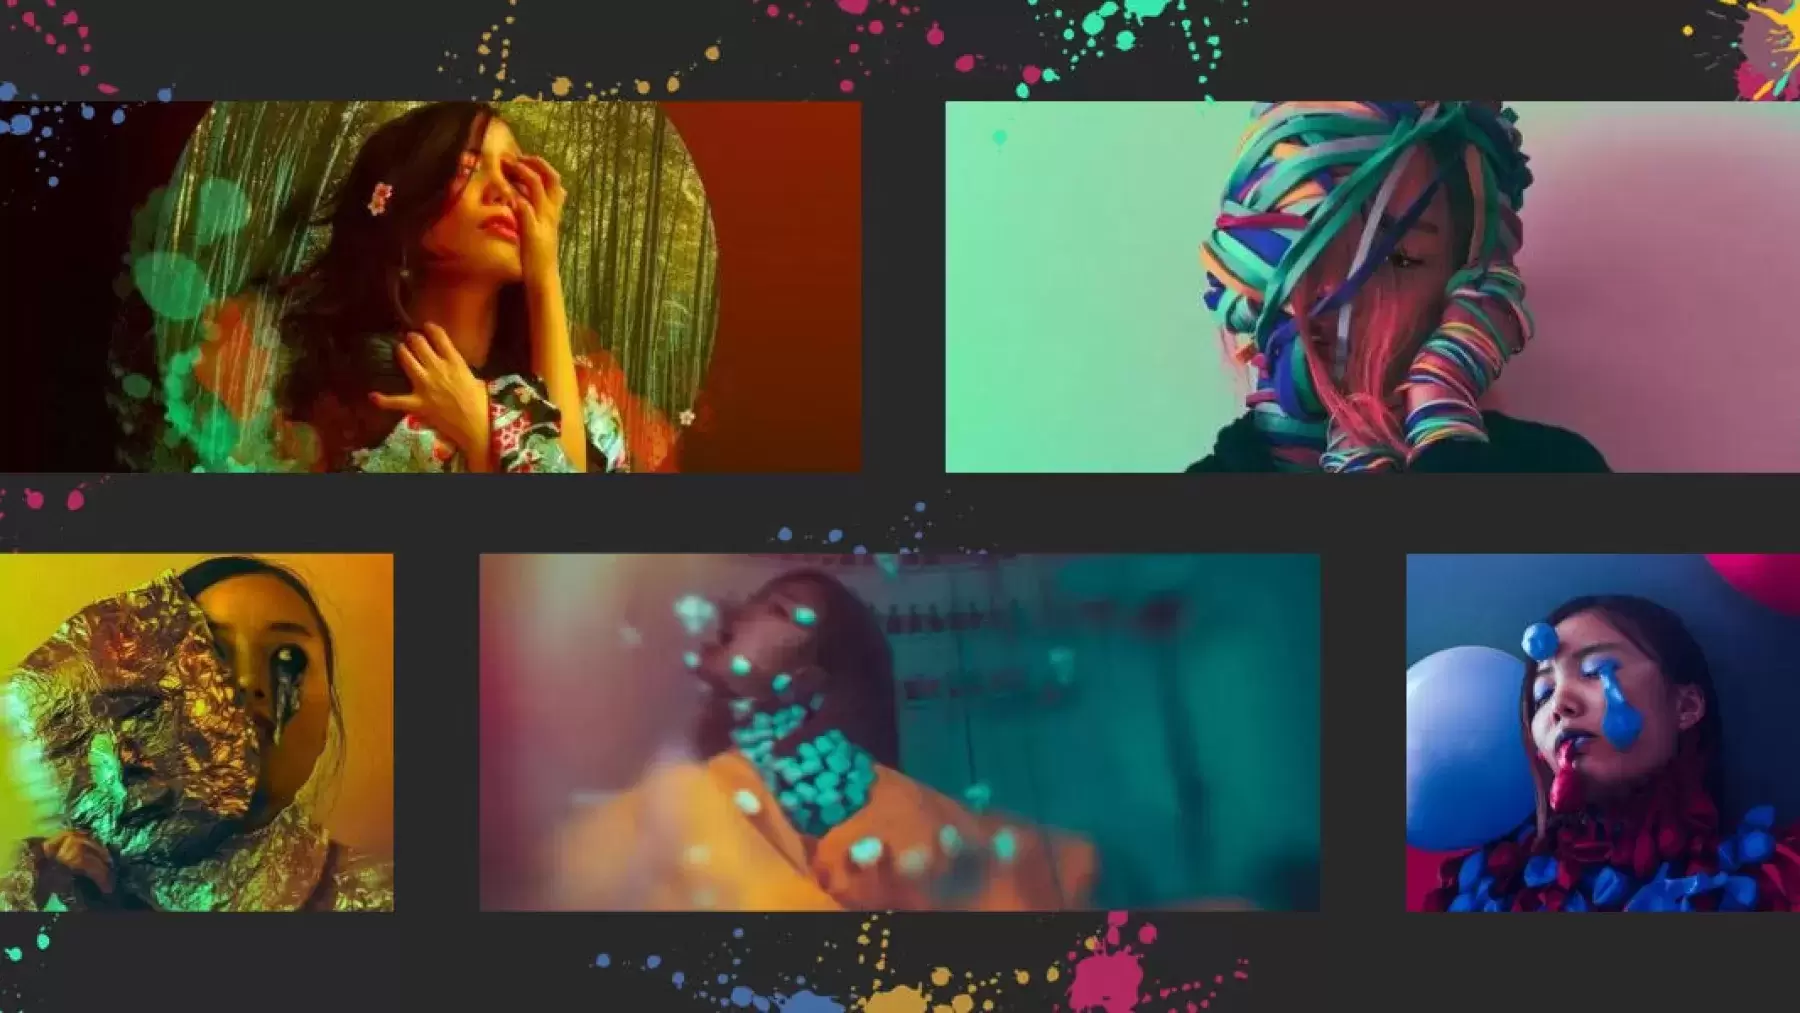 collage of artistic images featuring a woman with multiple colors, taking off masks, paint dripping down her face, colored strings covering her face